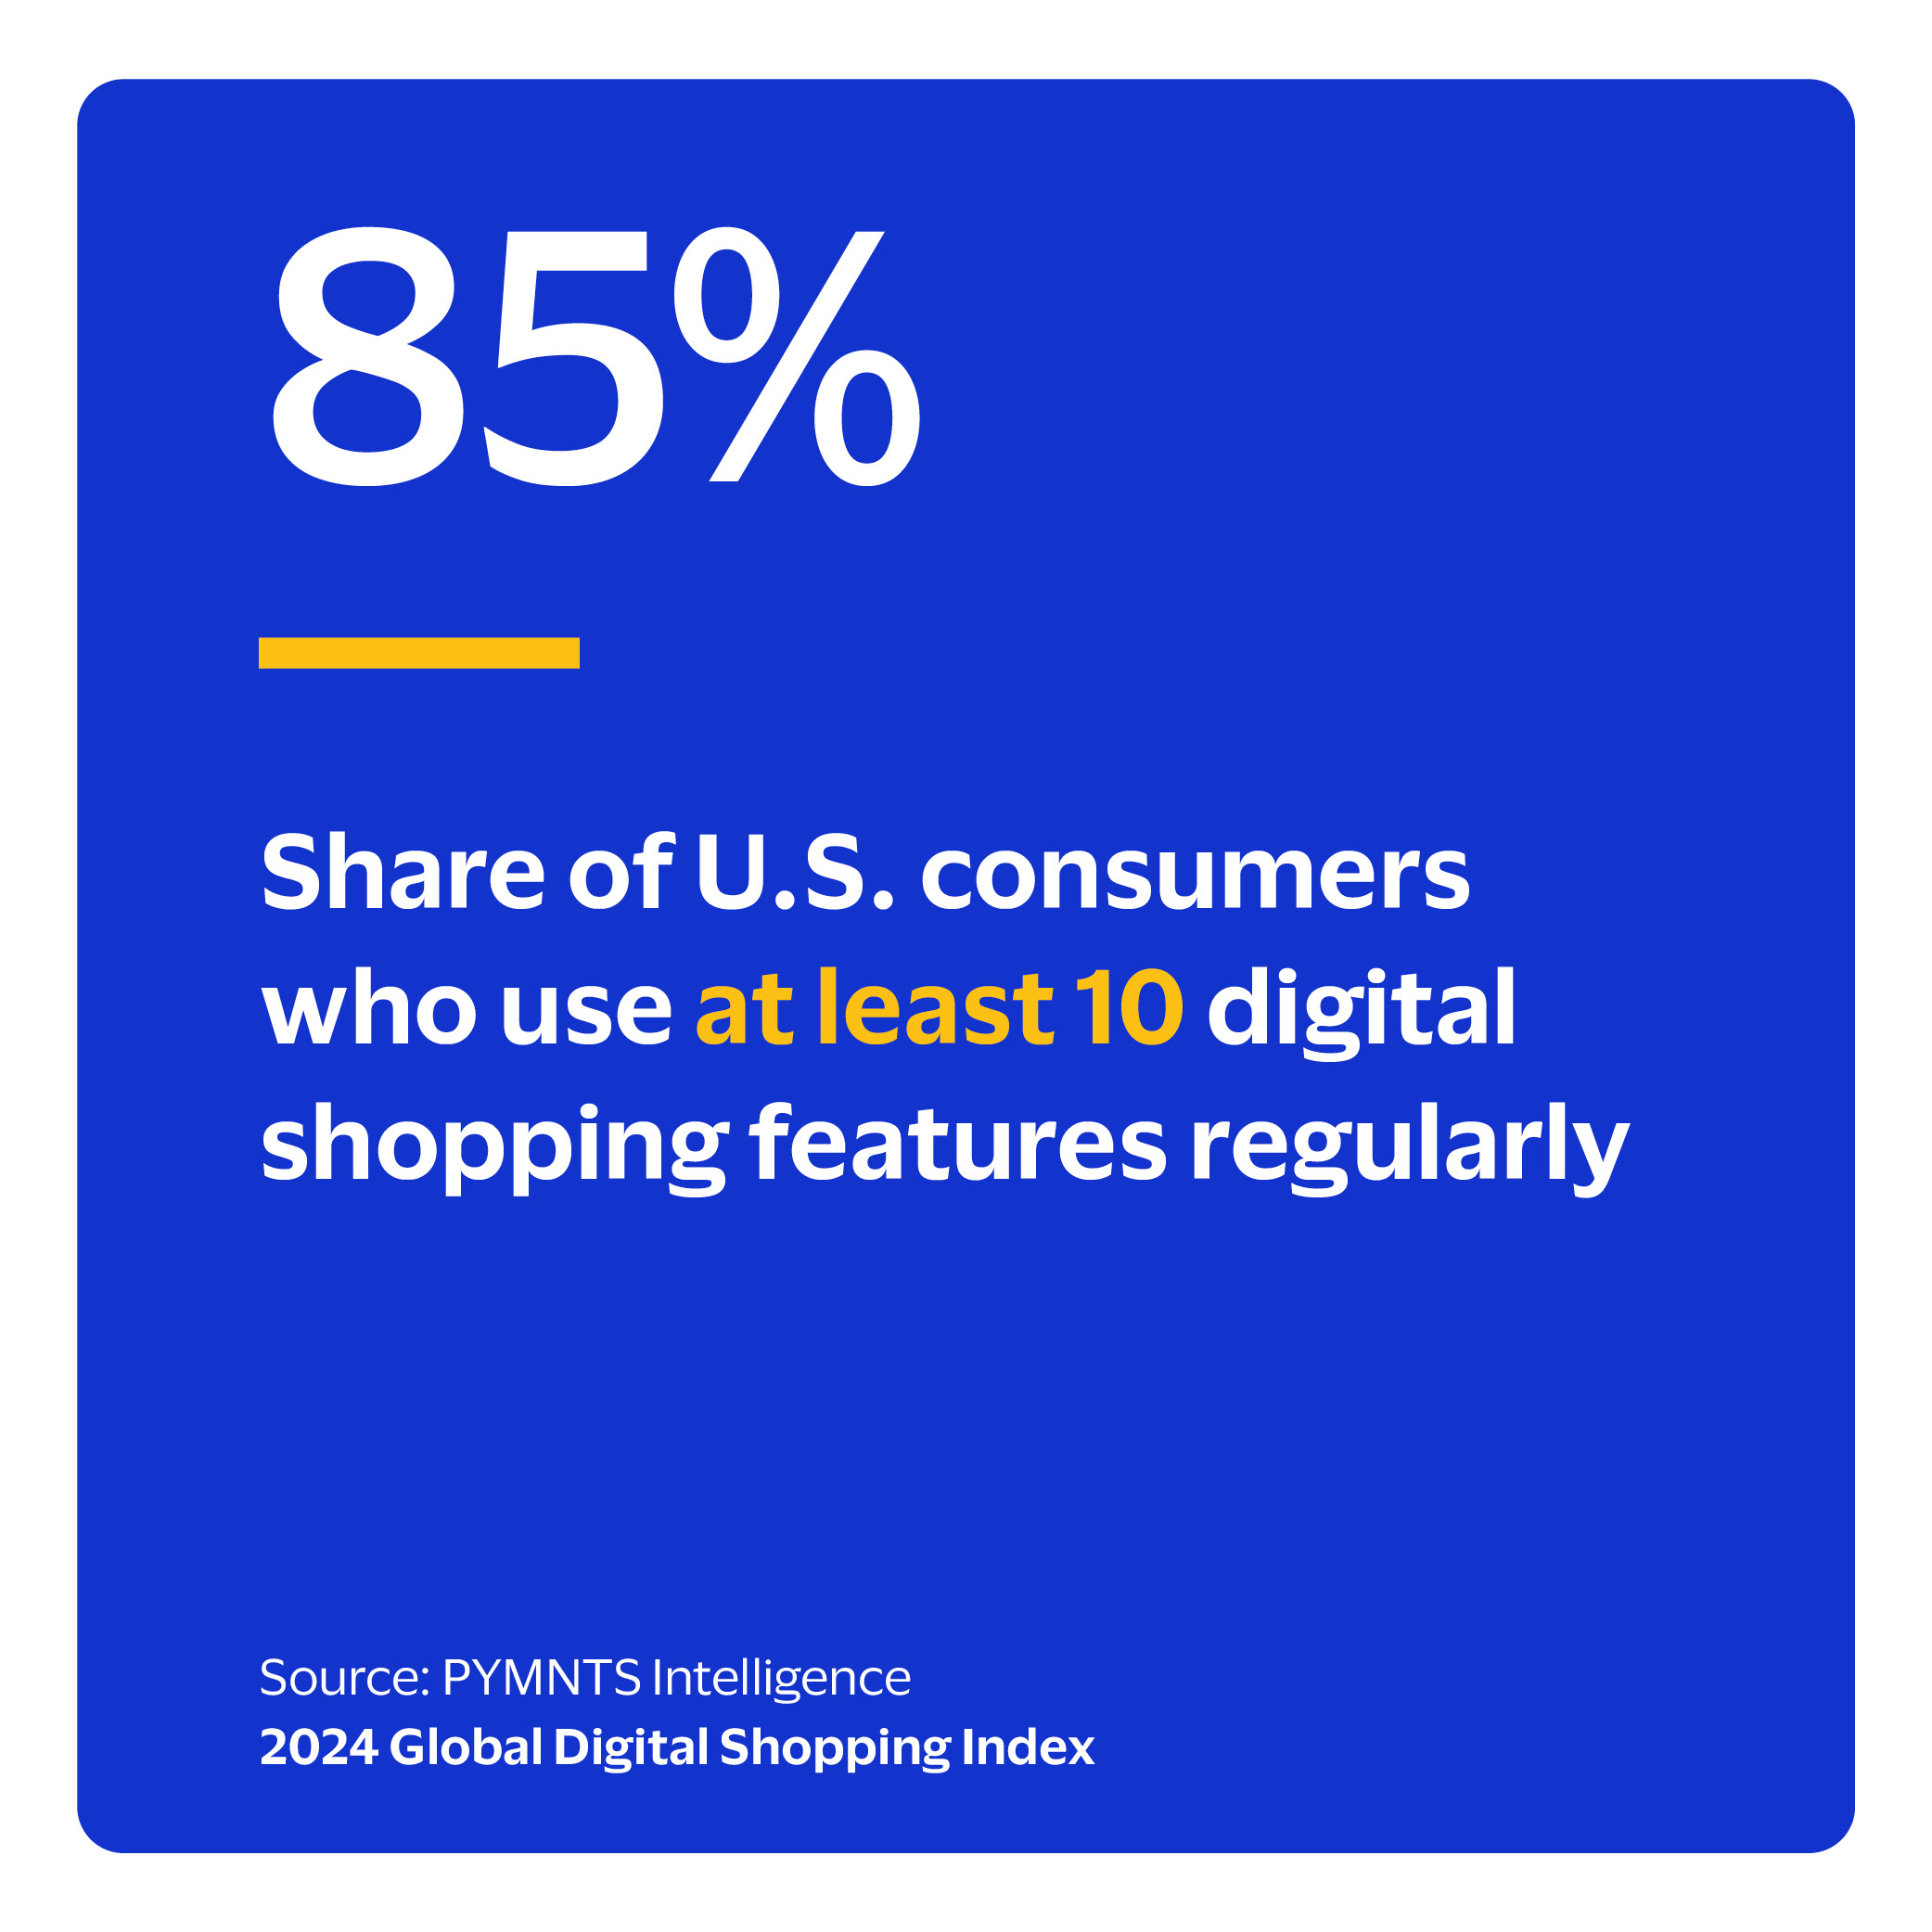 85%: Share of U.S. consumers who use at least 10 digital shopping features regularly